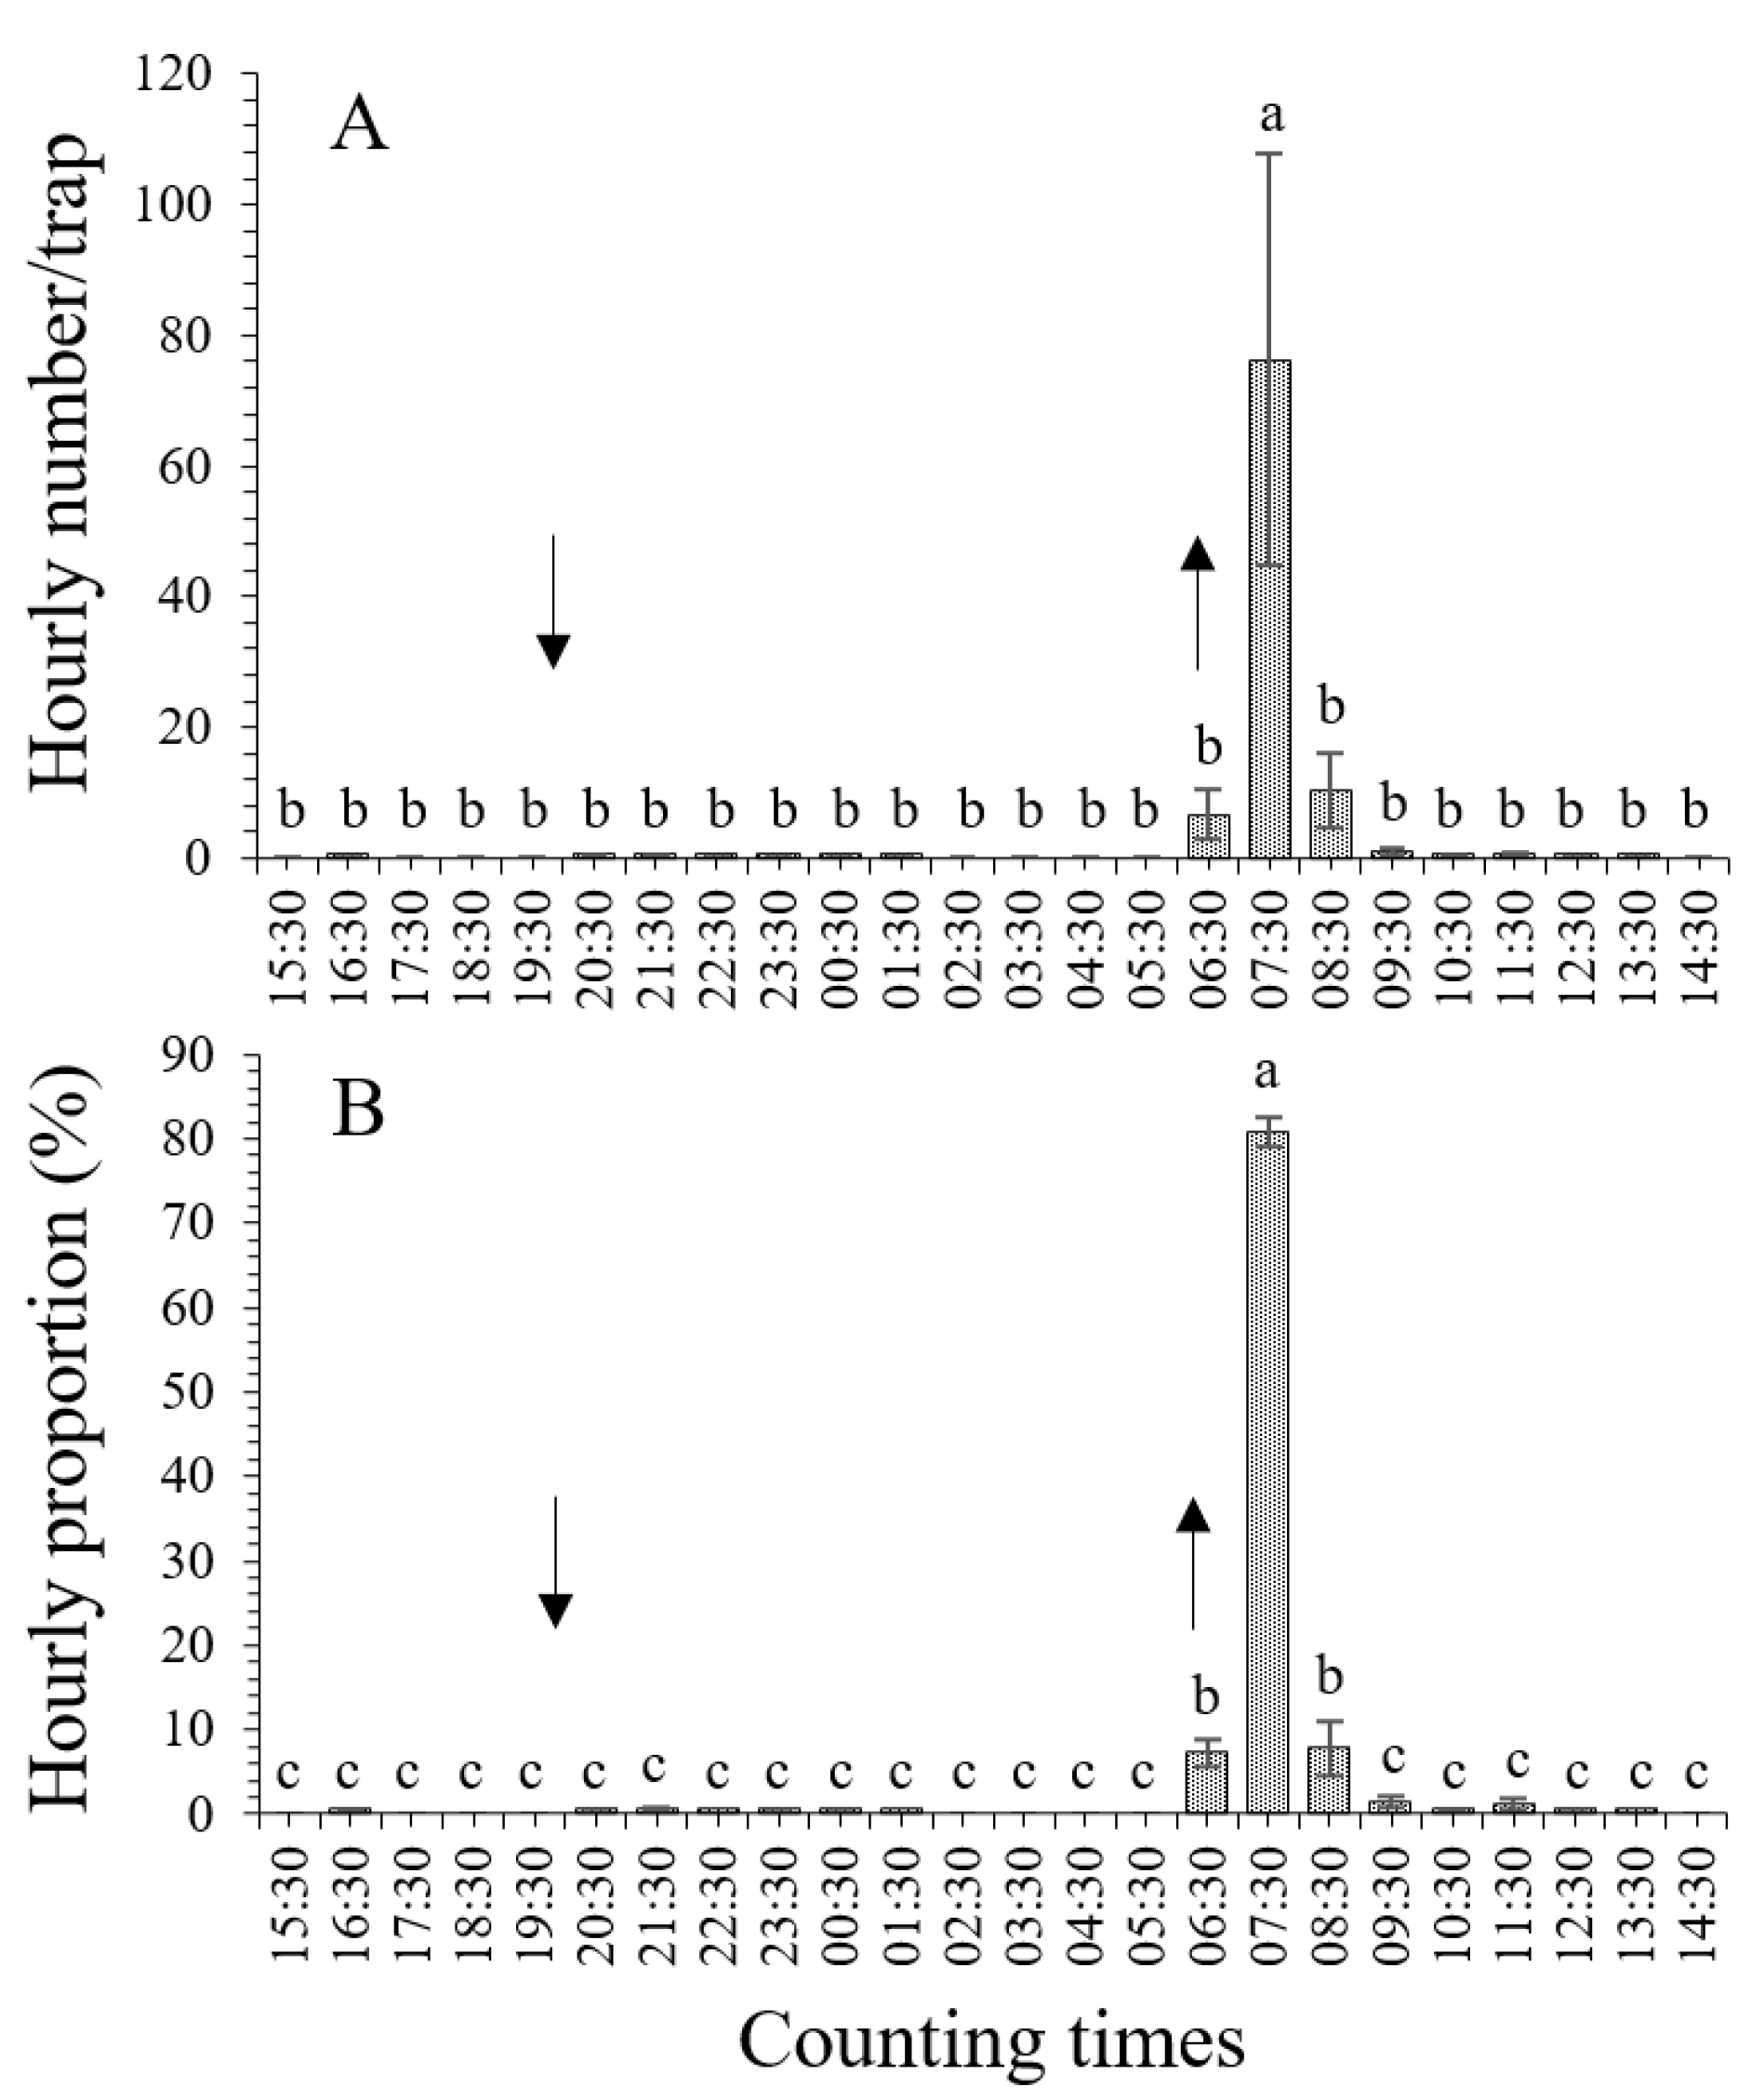 Horticulturae Free Full-Text Determination of Hourly Distribution of Tuta absoluta (Meyrick) (Lepidoptera Gelechiidae) Using Sex Pheromone and Ultraviolet Light Traps in Protected Tomato Crops